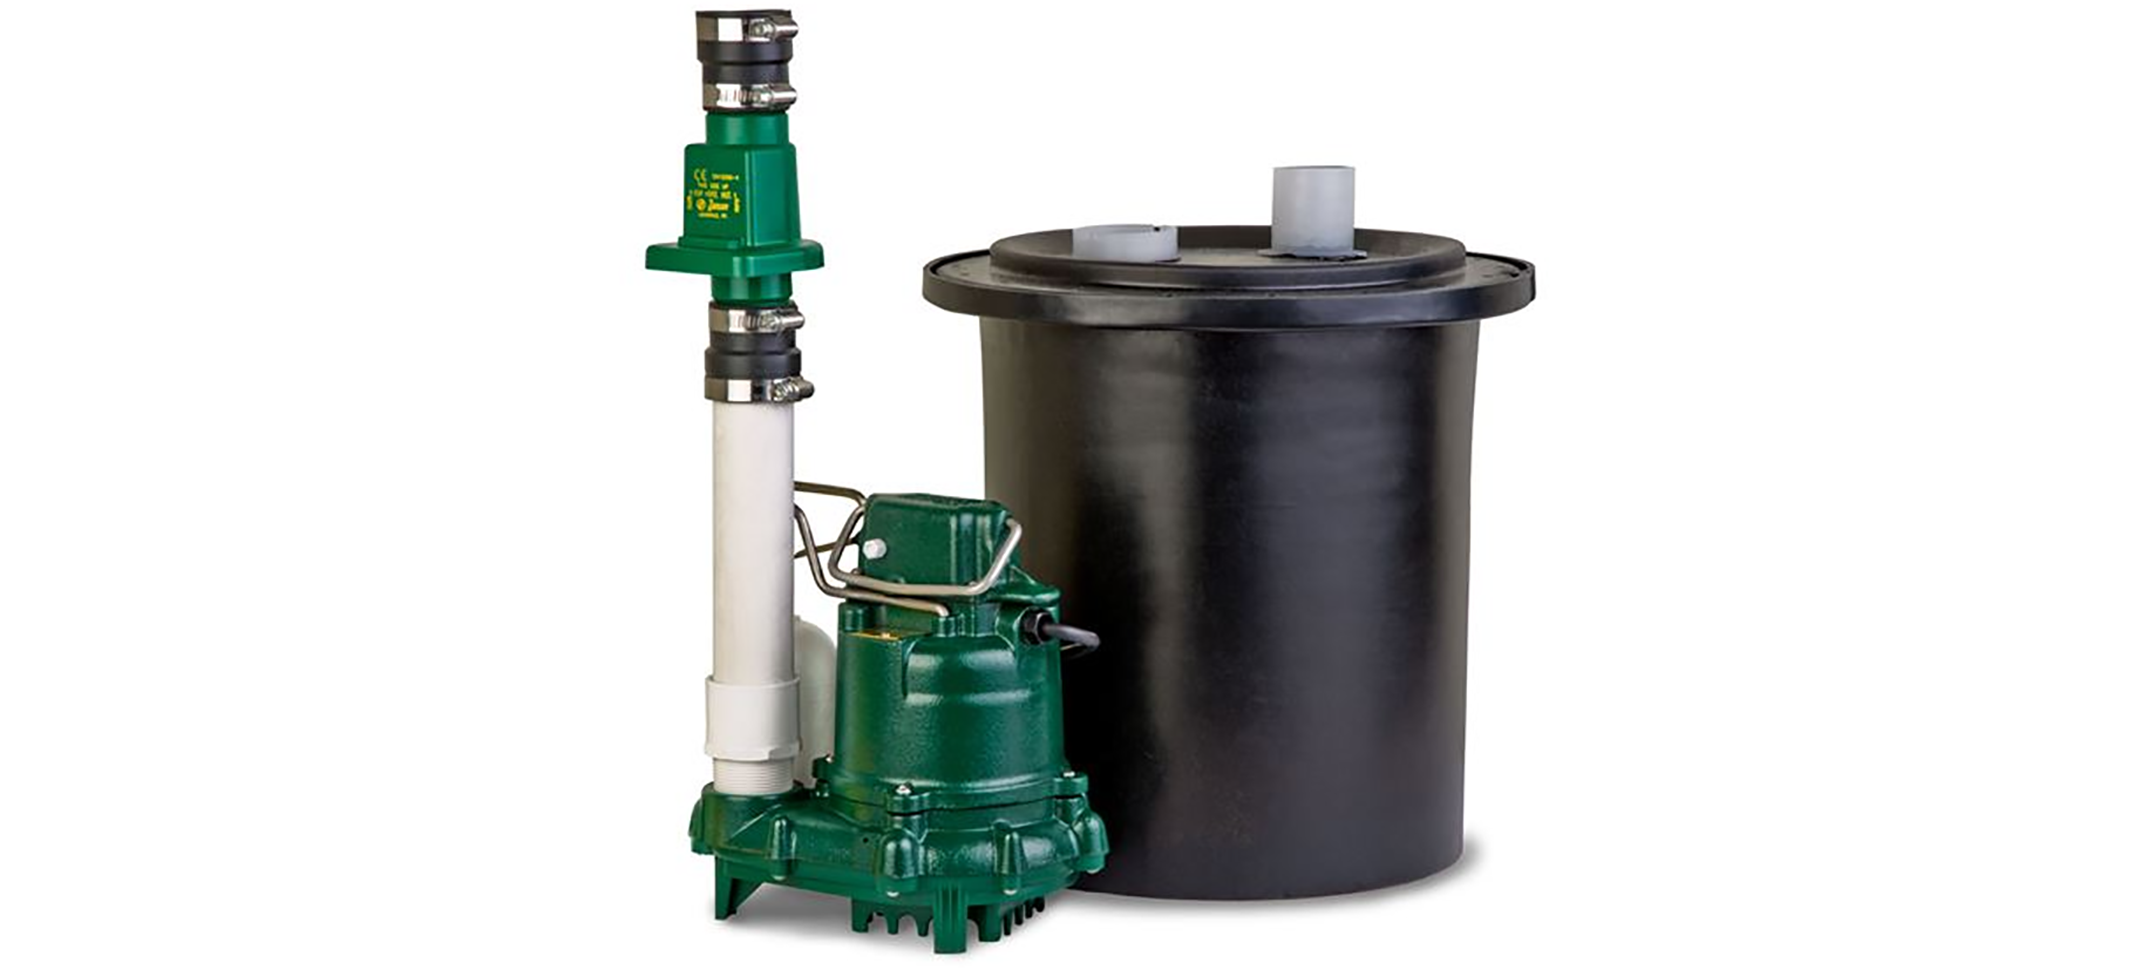 Zoeller 105-0001 Drain Pump System with 2" Inlet